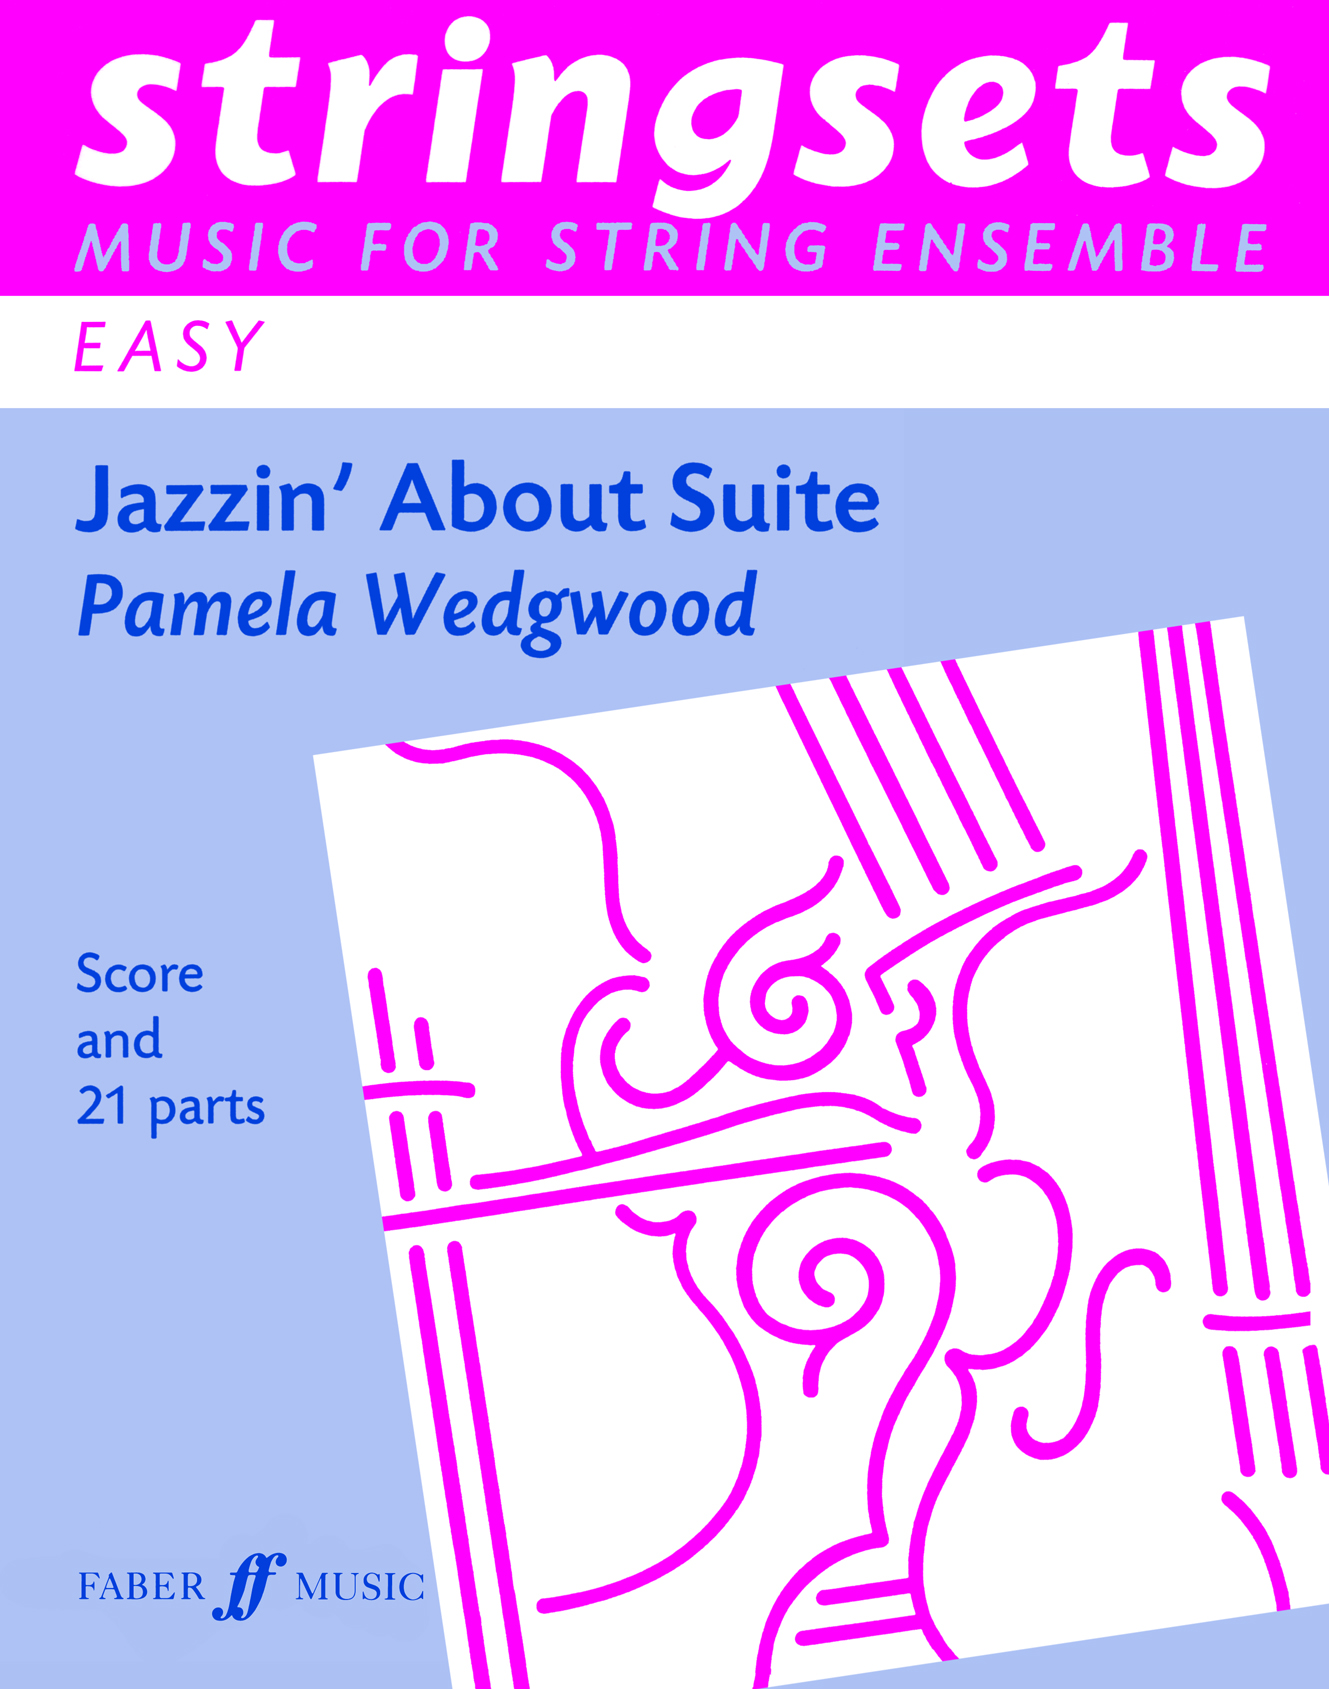 Jazzin' About. Stringsets (score &amp; pts) (WEDGWOOD PAM)